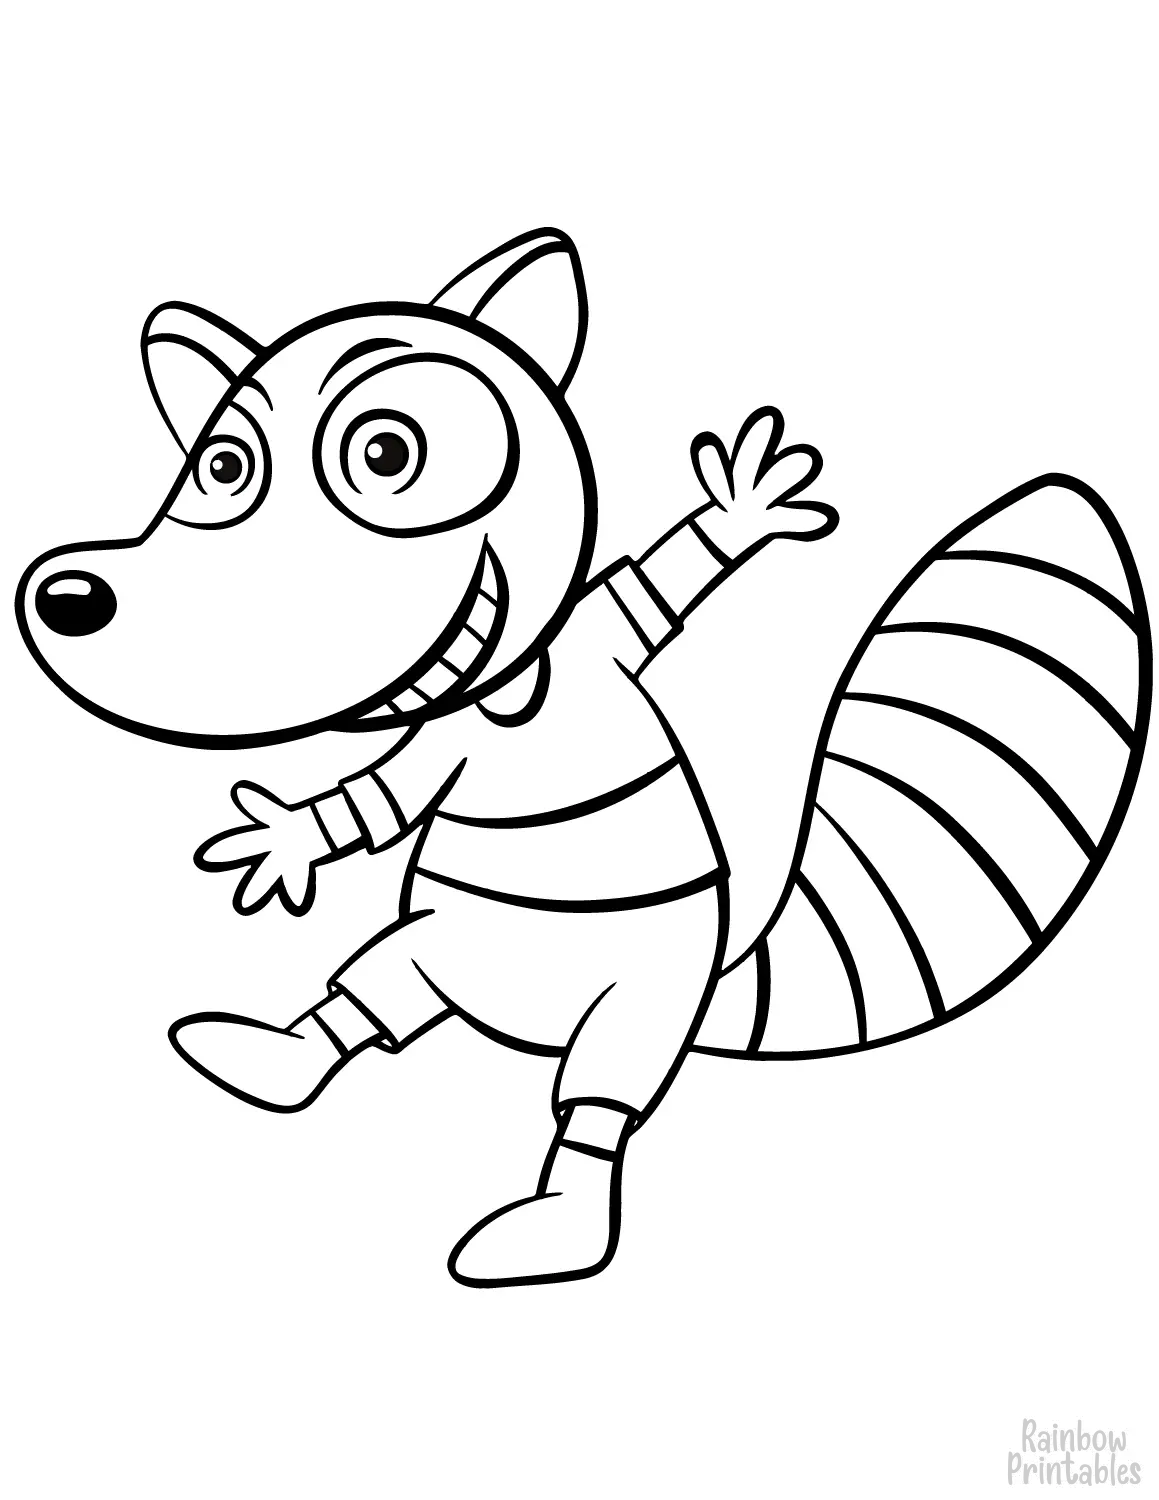 Cute-doodle-of-racoon-coloring-page-for-kids-Simple Easy Color Animal Pages for Kids